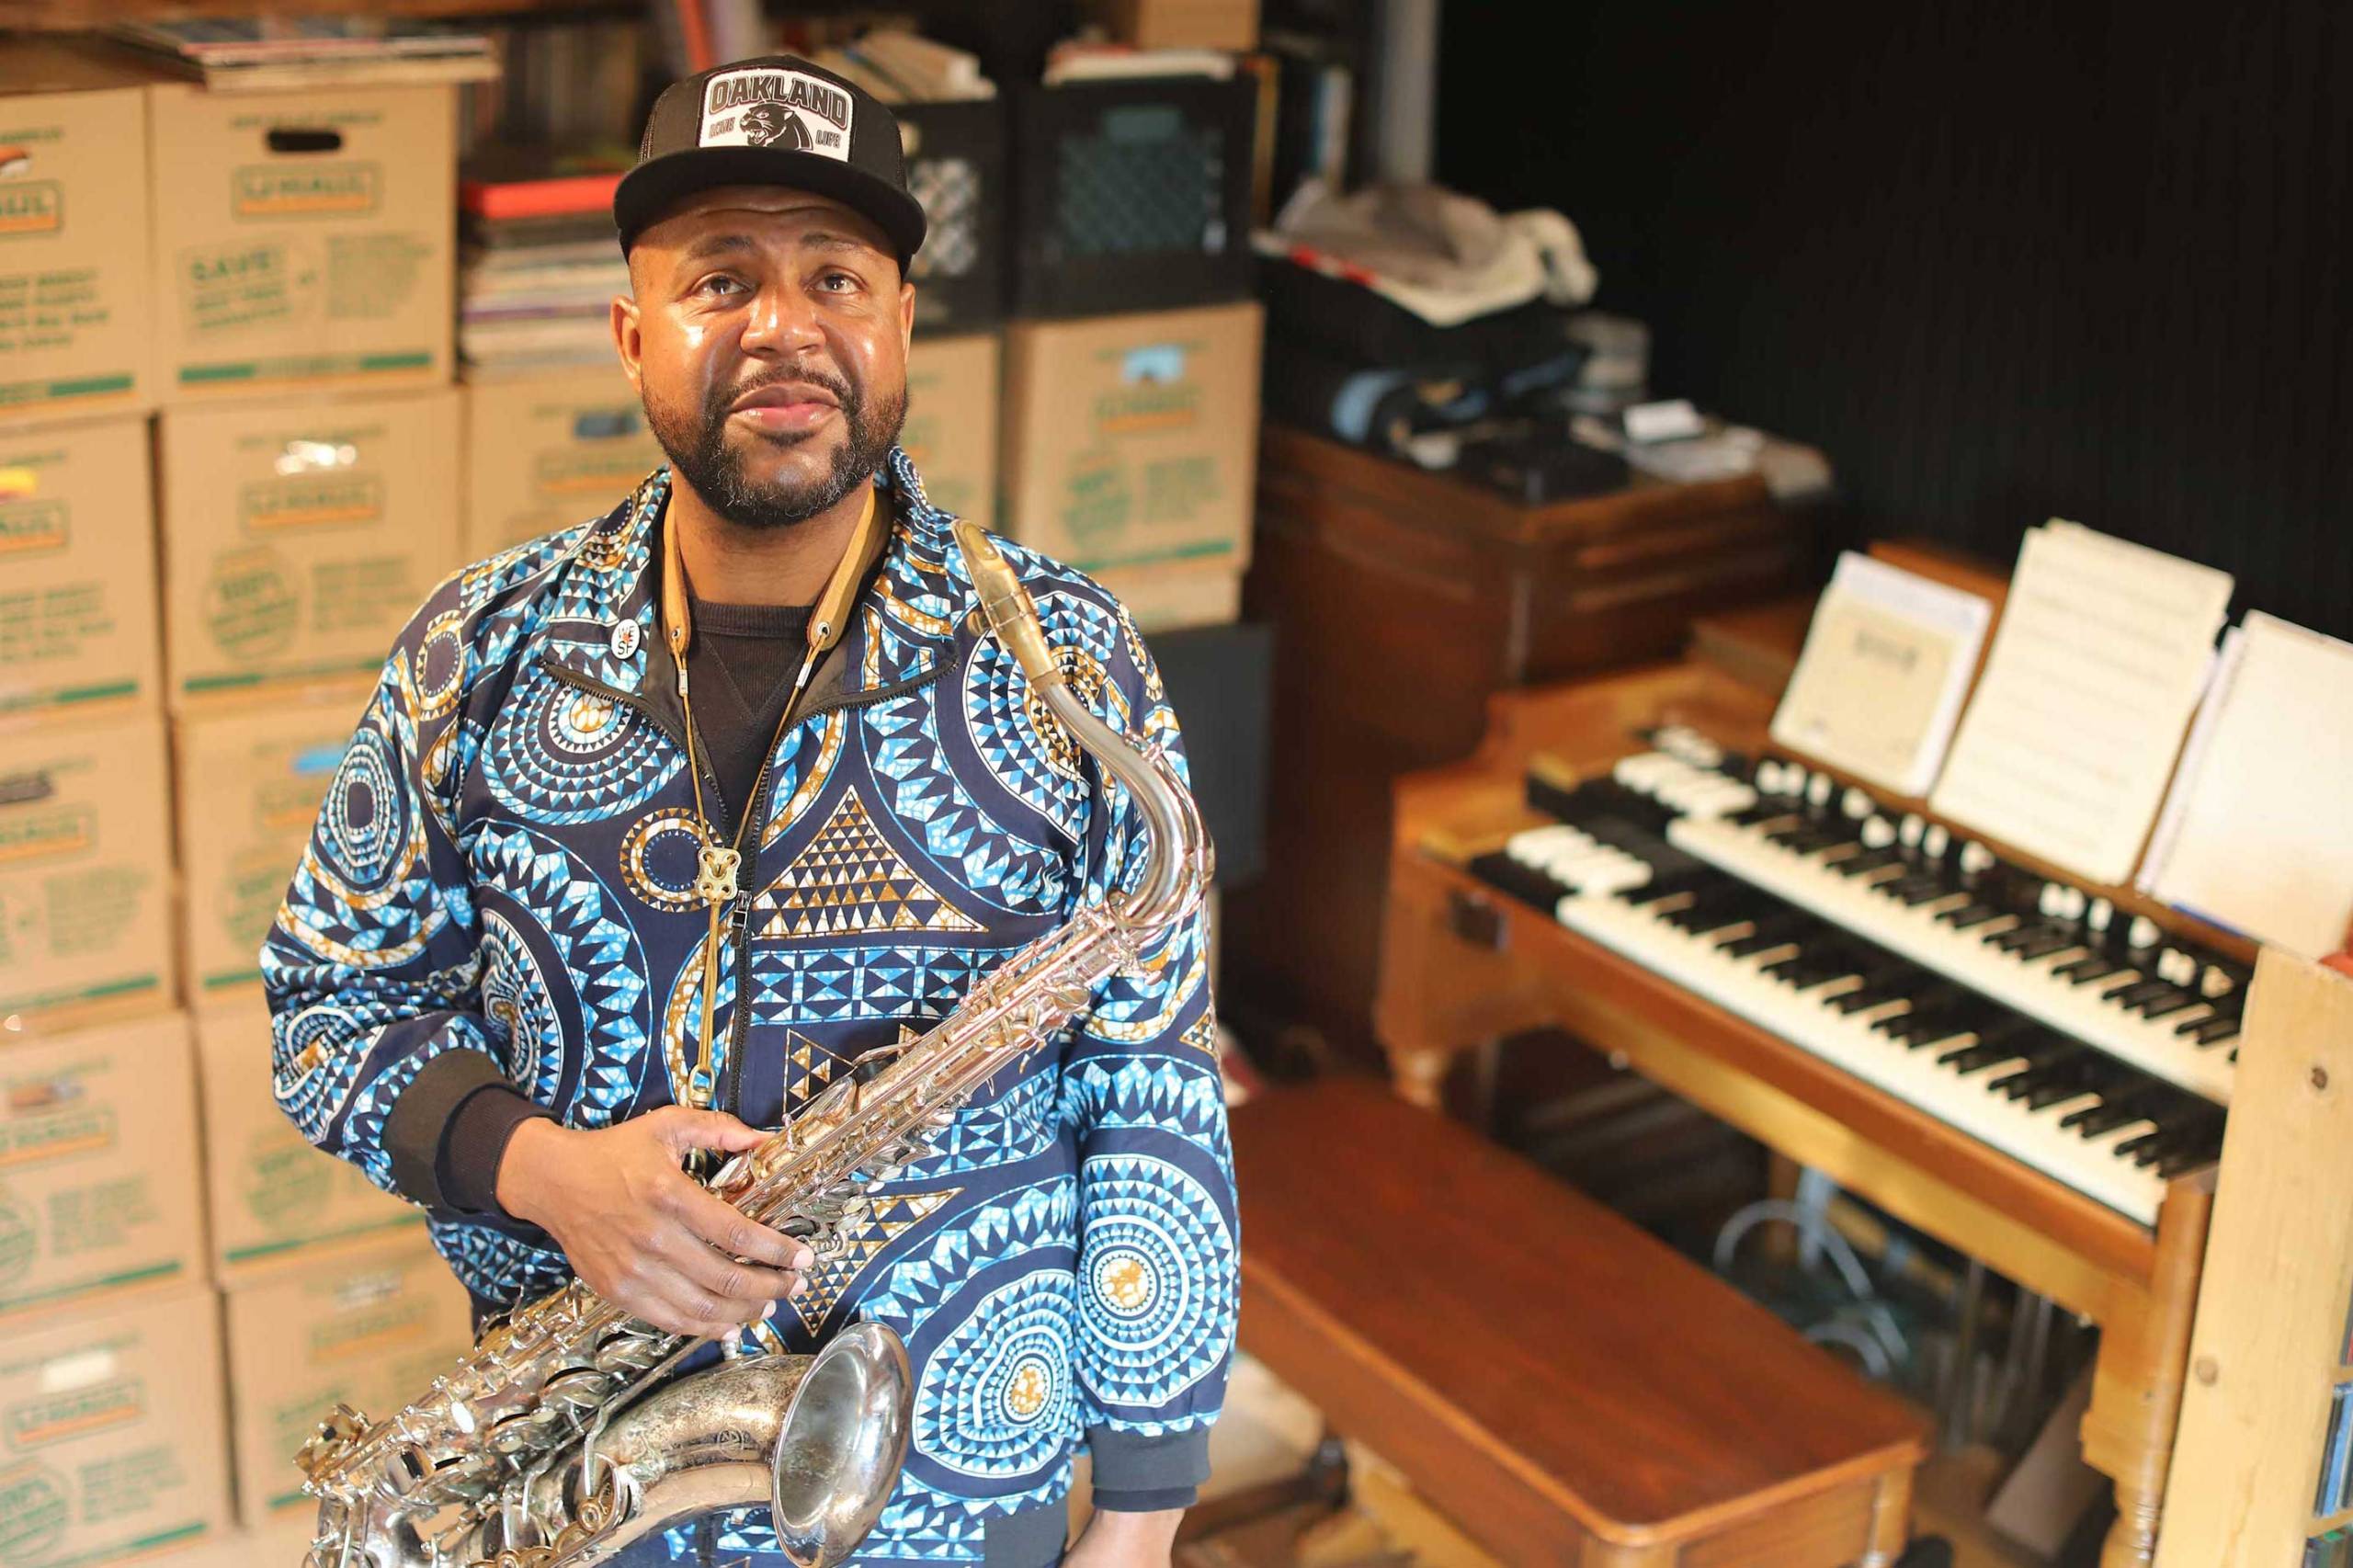 A Black man in a cap and patterned blue shirt stands with a saxophone, with moving boxes and an organ in the background